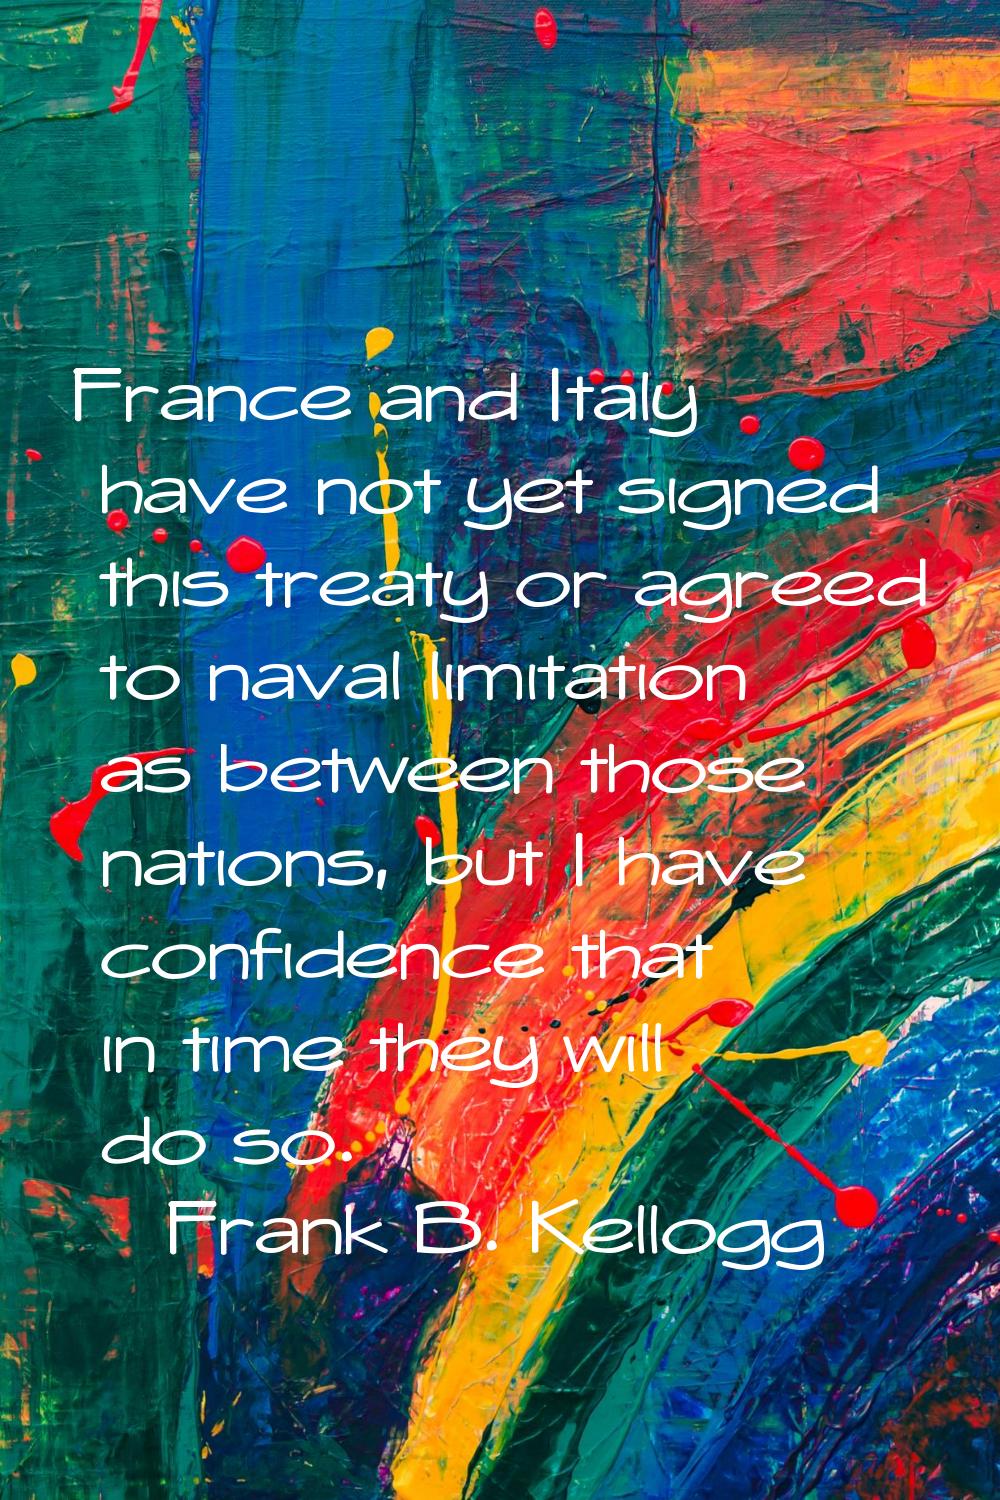 France and Italy have not yet signed this treaty or agreed to naval limitation as between those nat